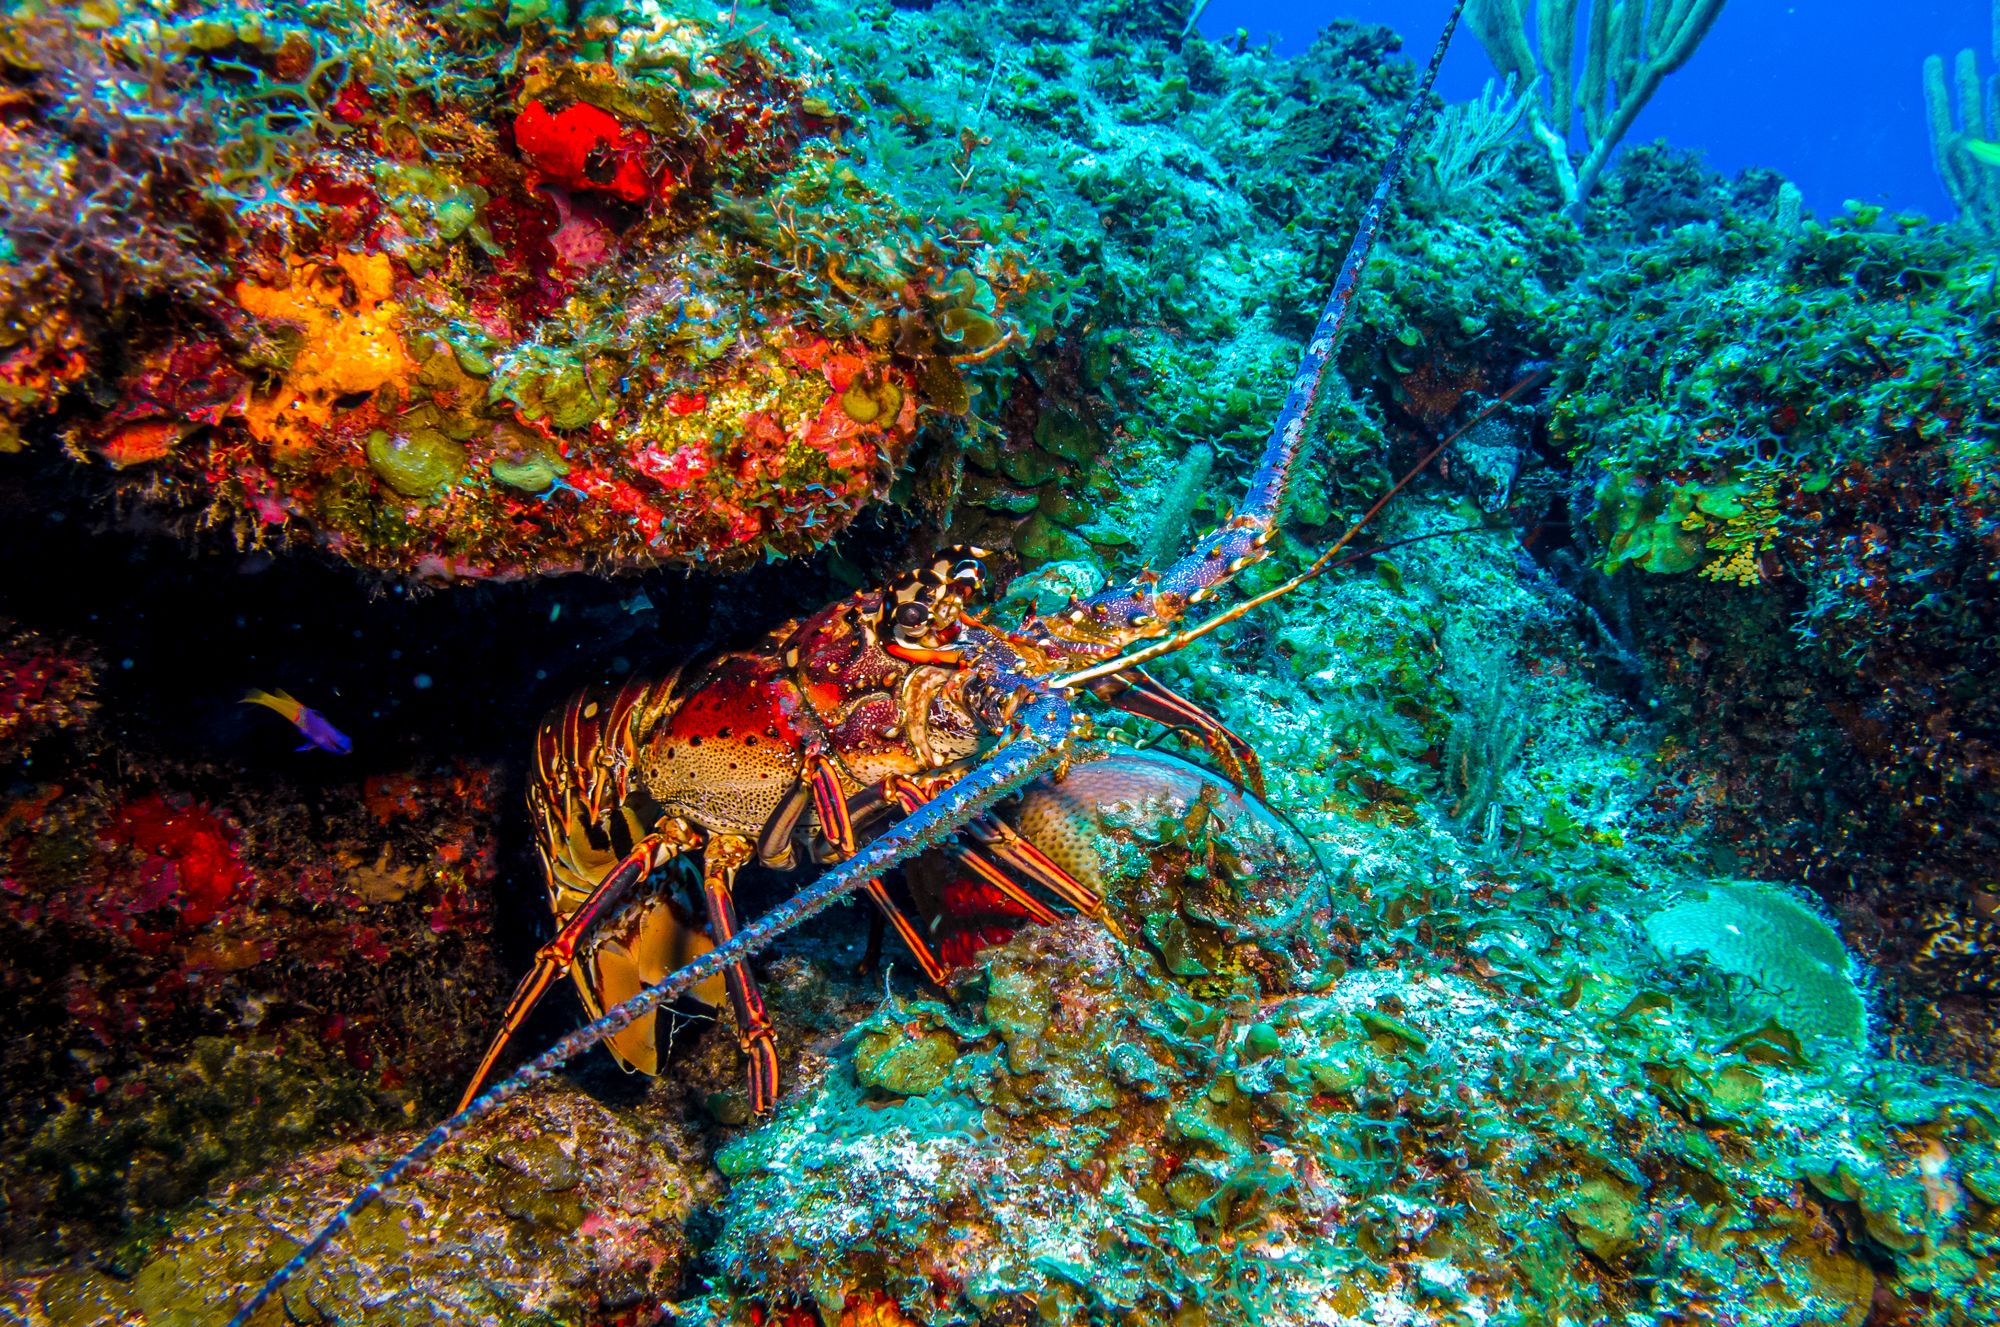 Bight Reef Coral Gardens Turks Caicos Spiny Lobster